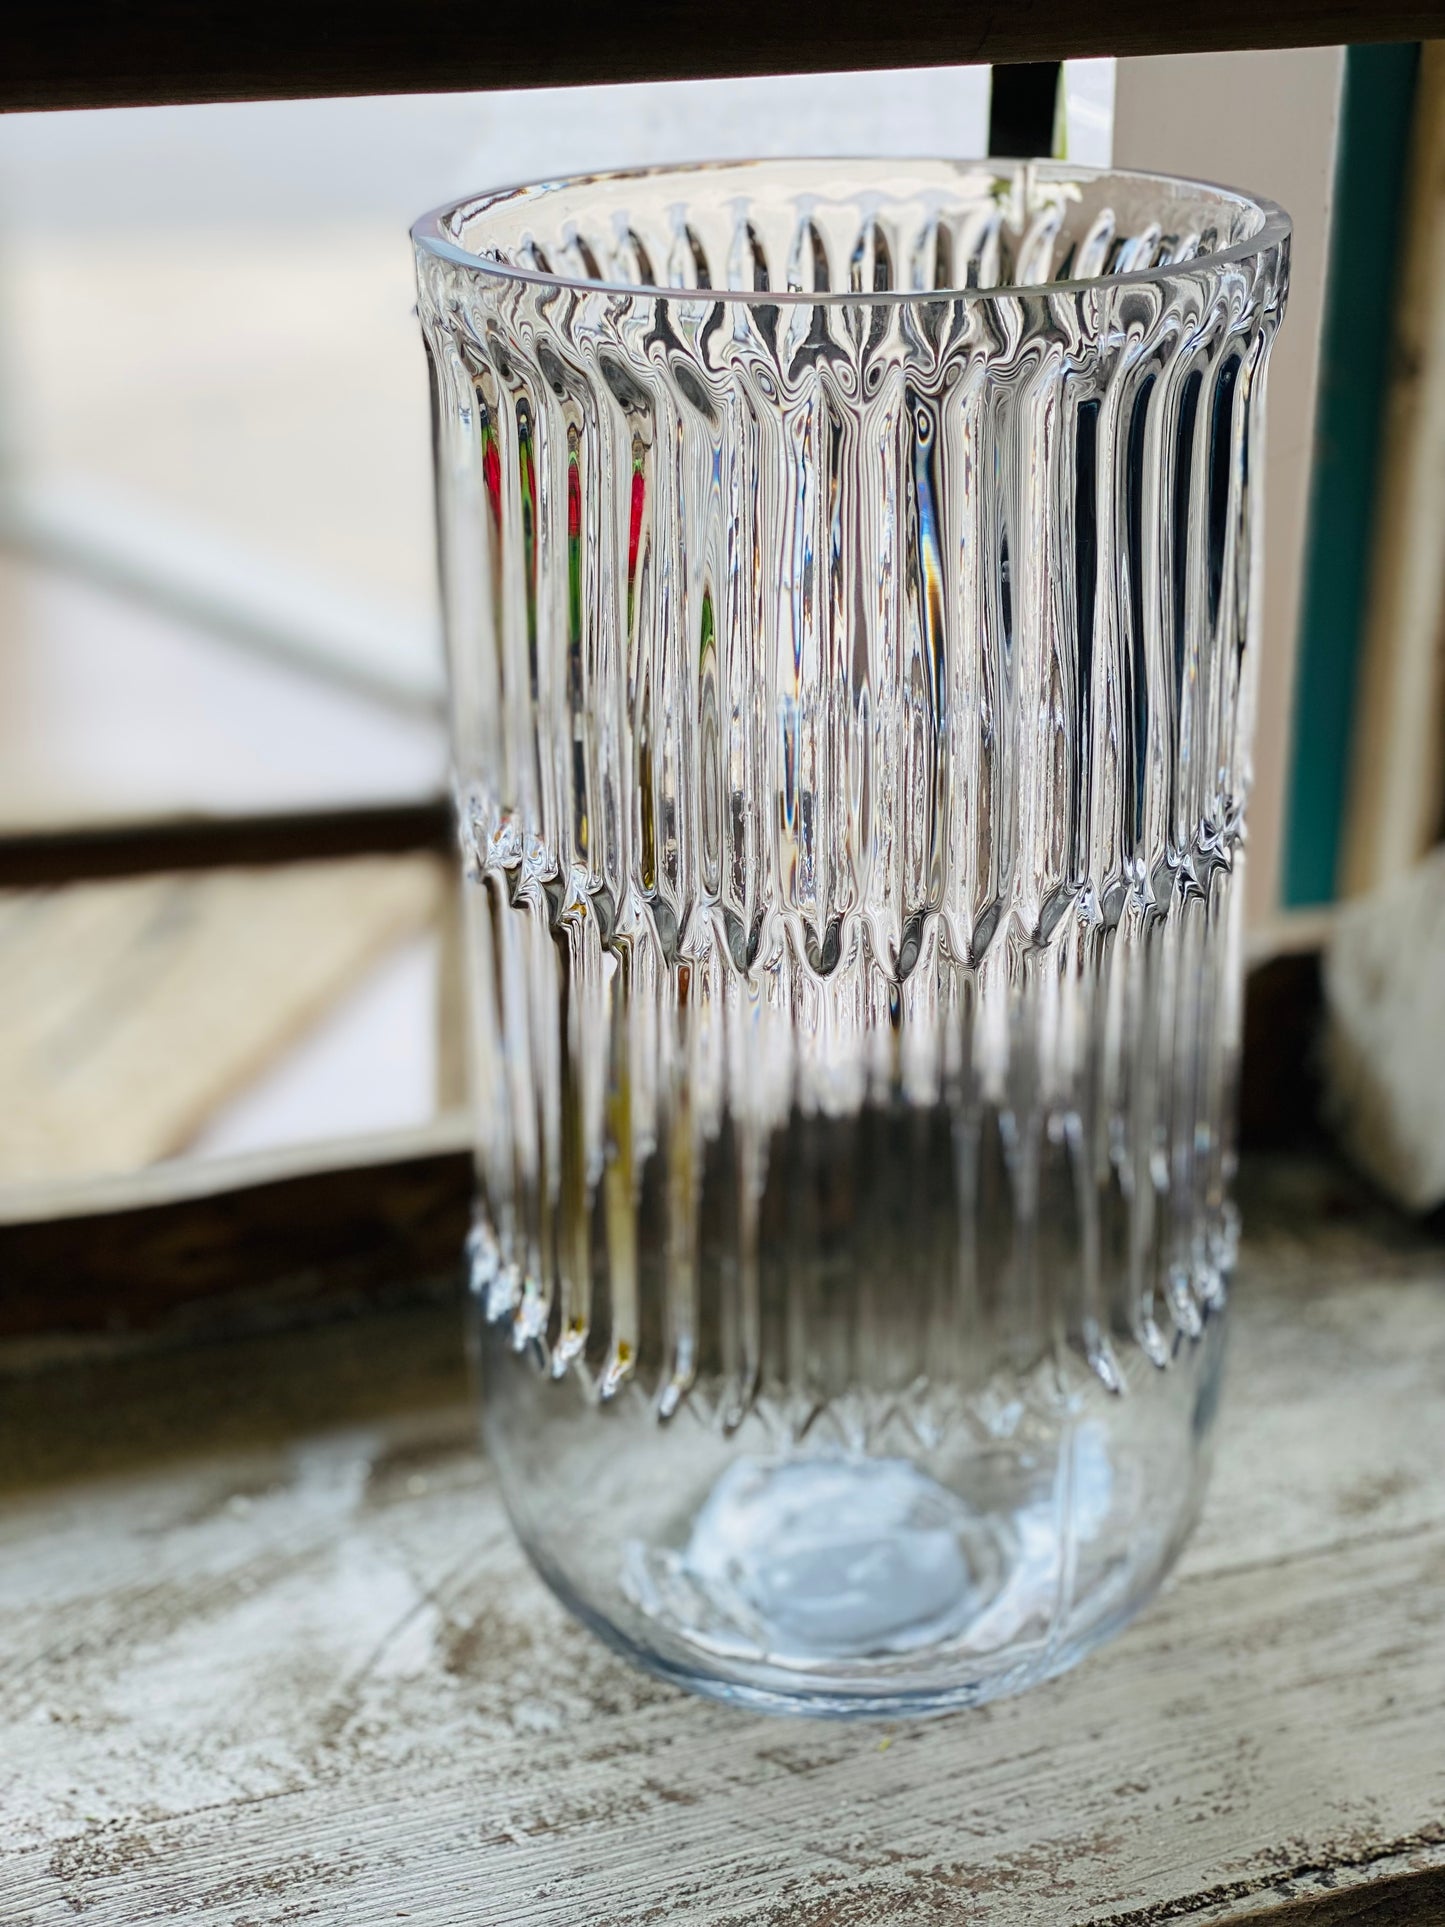 10" Tall - Glass Vase, Clear